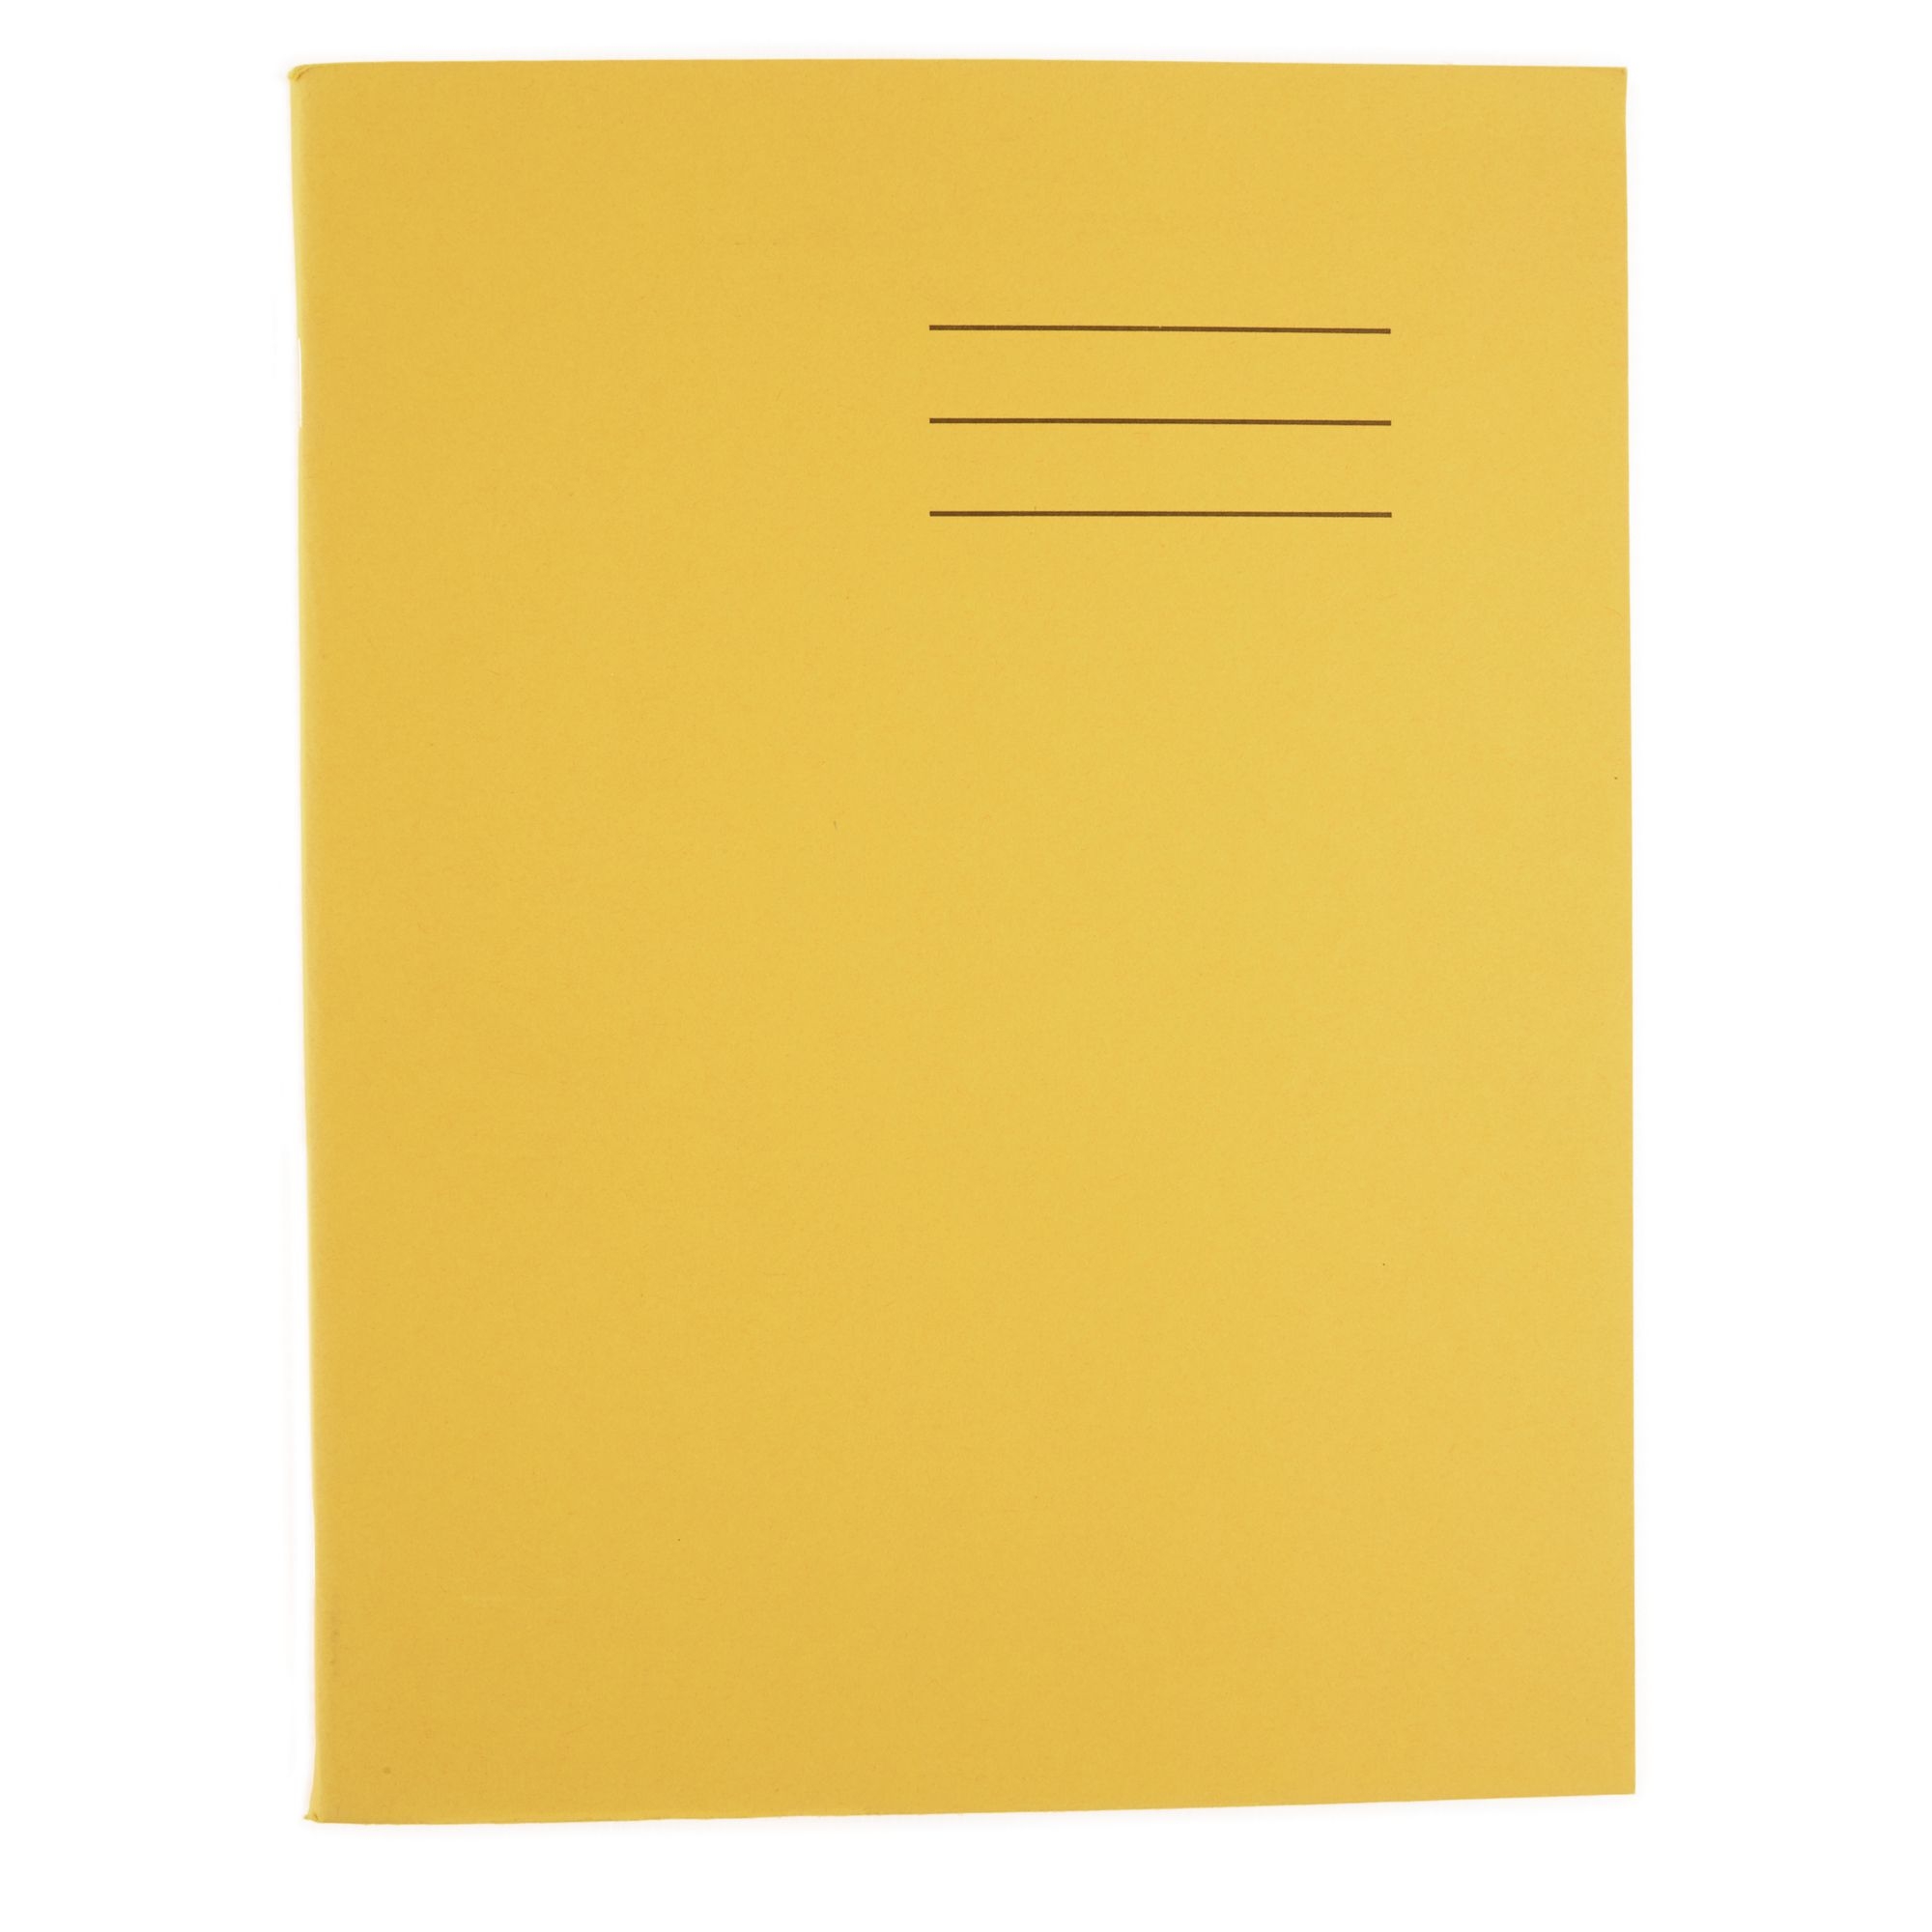 Yellow 9x7" Exercise Book 80-Page, 7mm Squared - Pack of 100